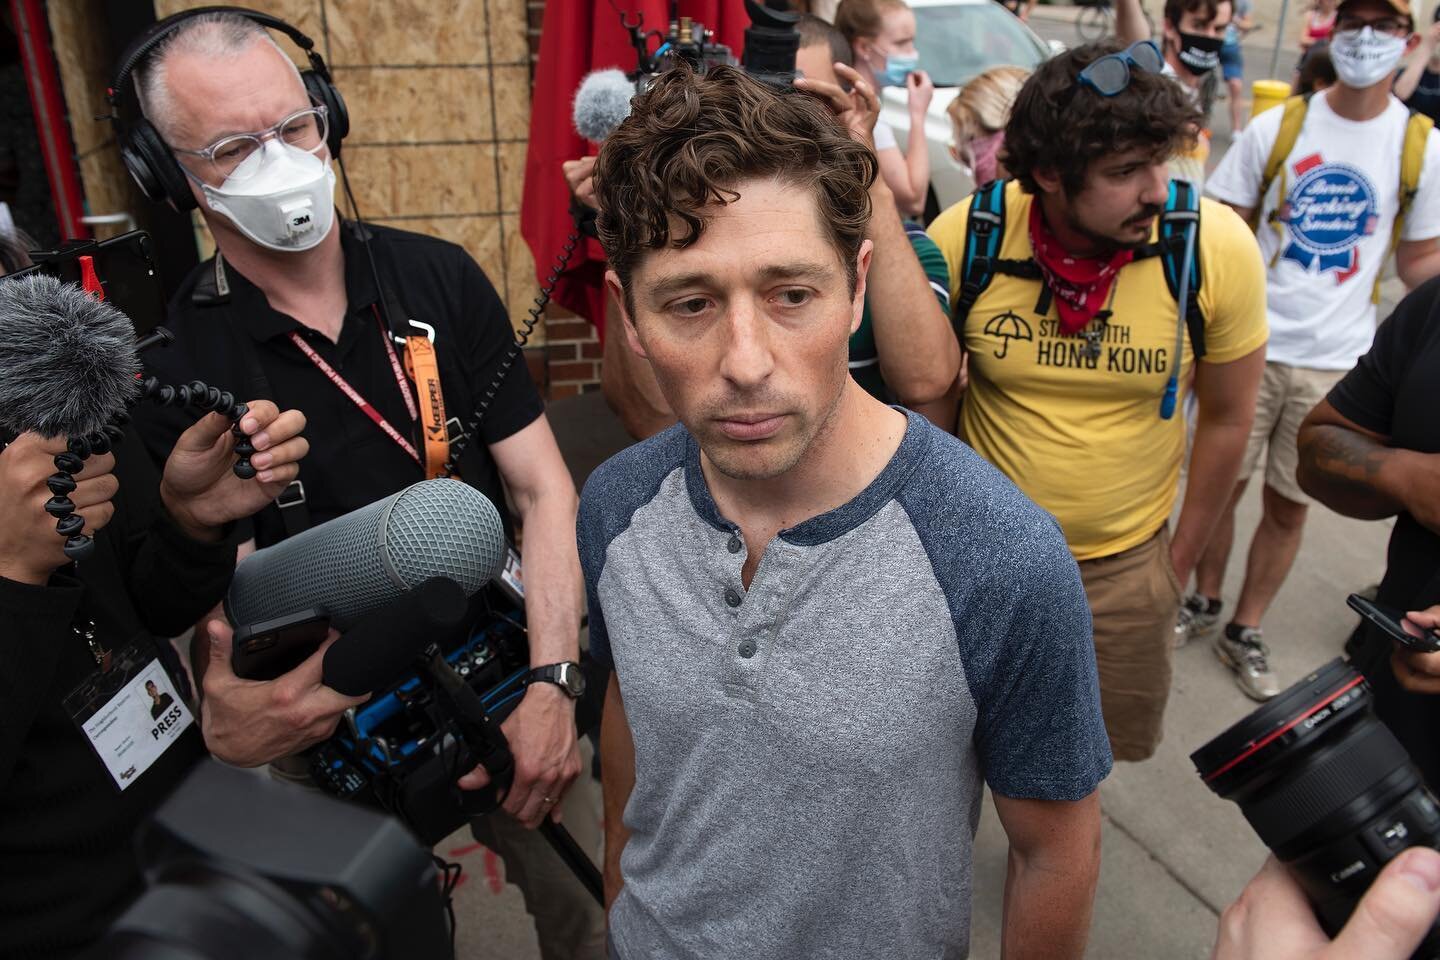 Minneapolis mayor Jacob Frey talks to reporters and constituents after getting up in front of the Defund MPD march and declaring that he does not support defunding or disbanding the police department. Many members of the Minneapolis City Council have